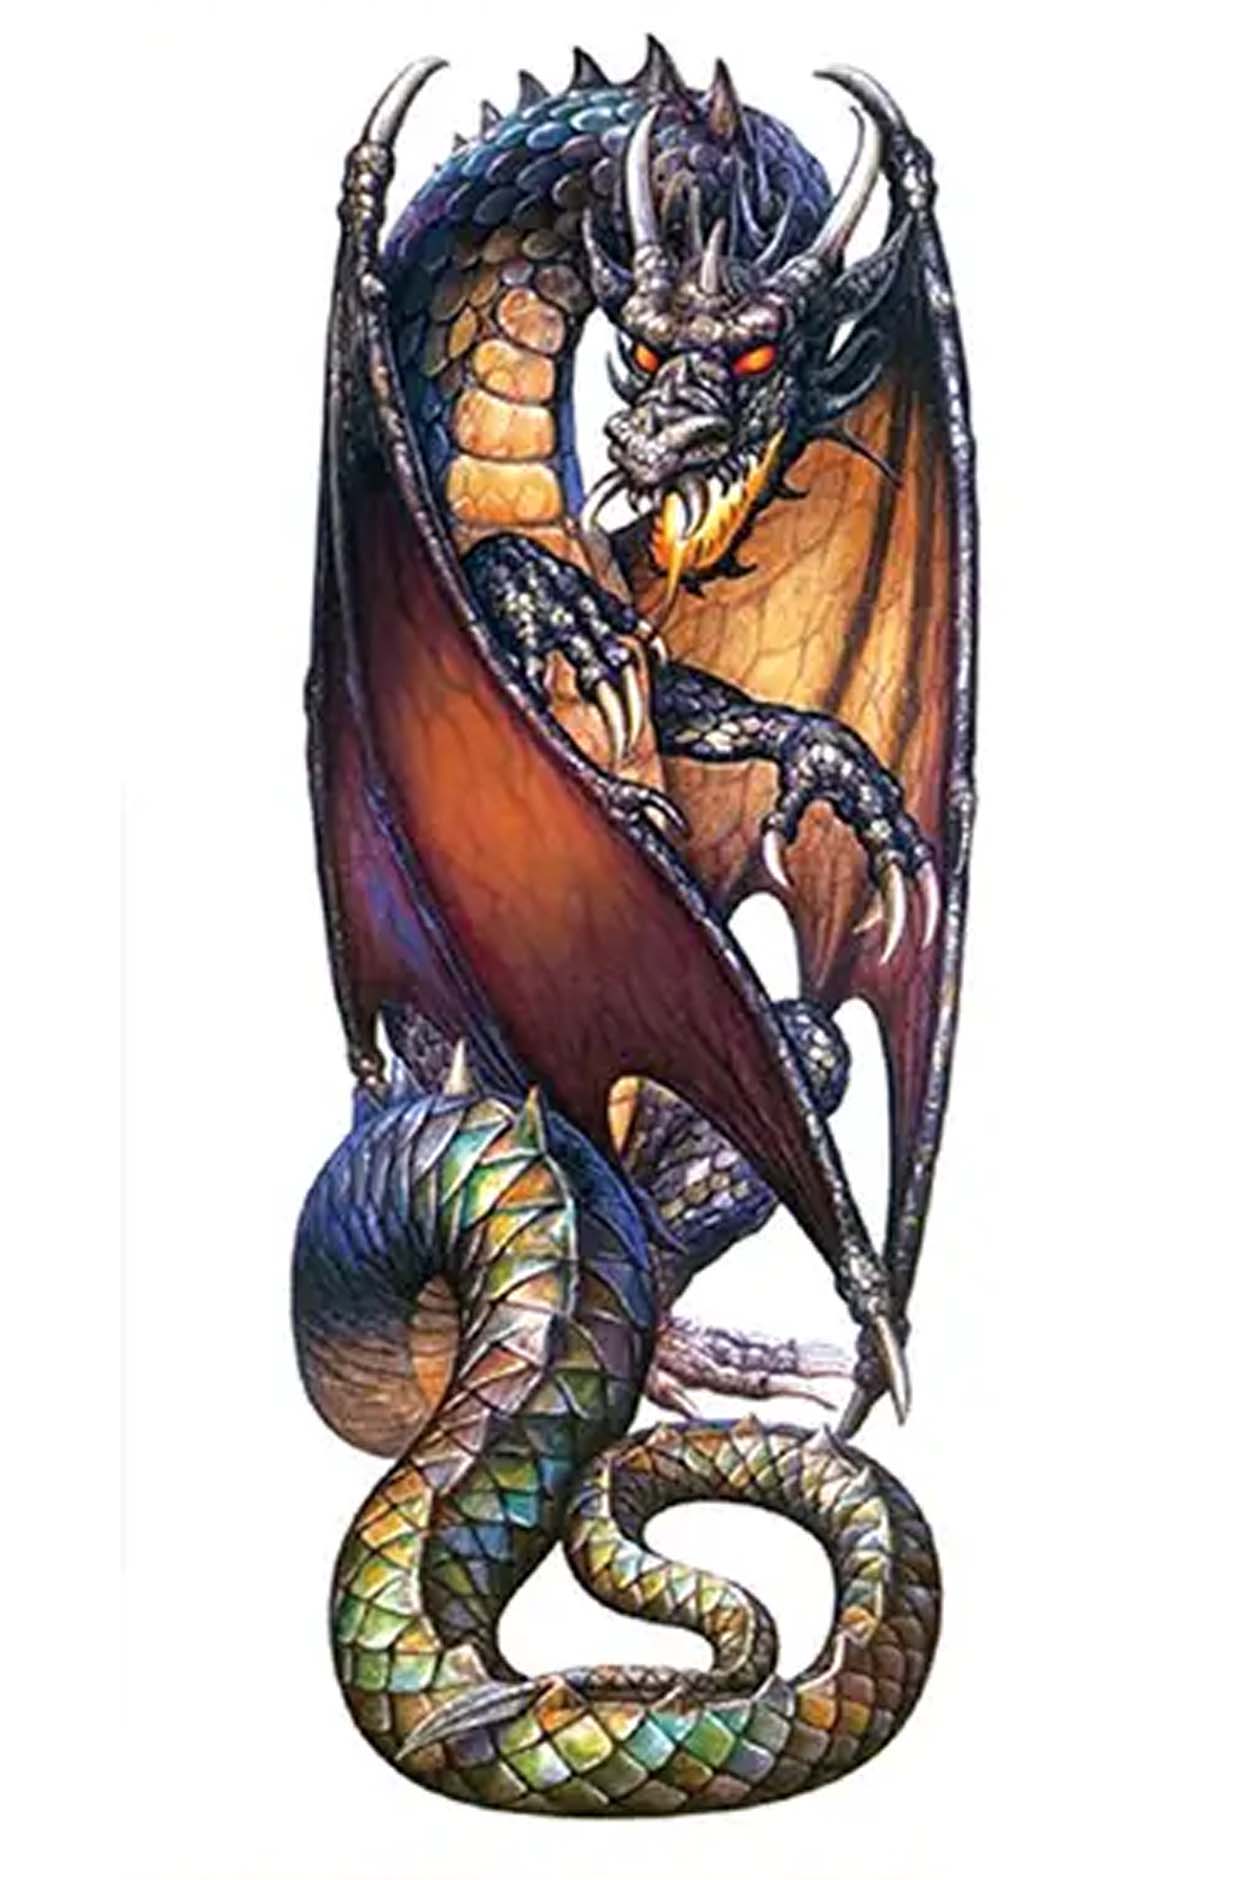 Every detail has been addressed in this design of a brown-winged dragon. Diamond-shaped scales in greens and blues run along a spiked tail. His glowing orange eyes and mouth impress a battle readiness. The colorful design is an asymmetrical stance perfect for an arm or leg display.